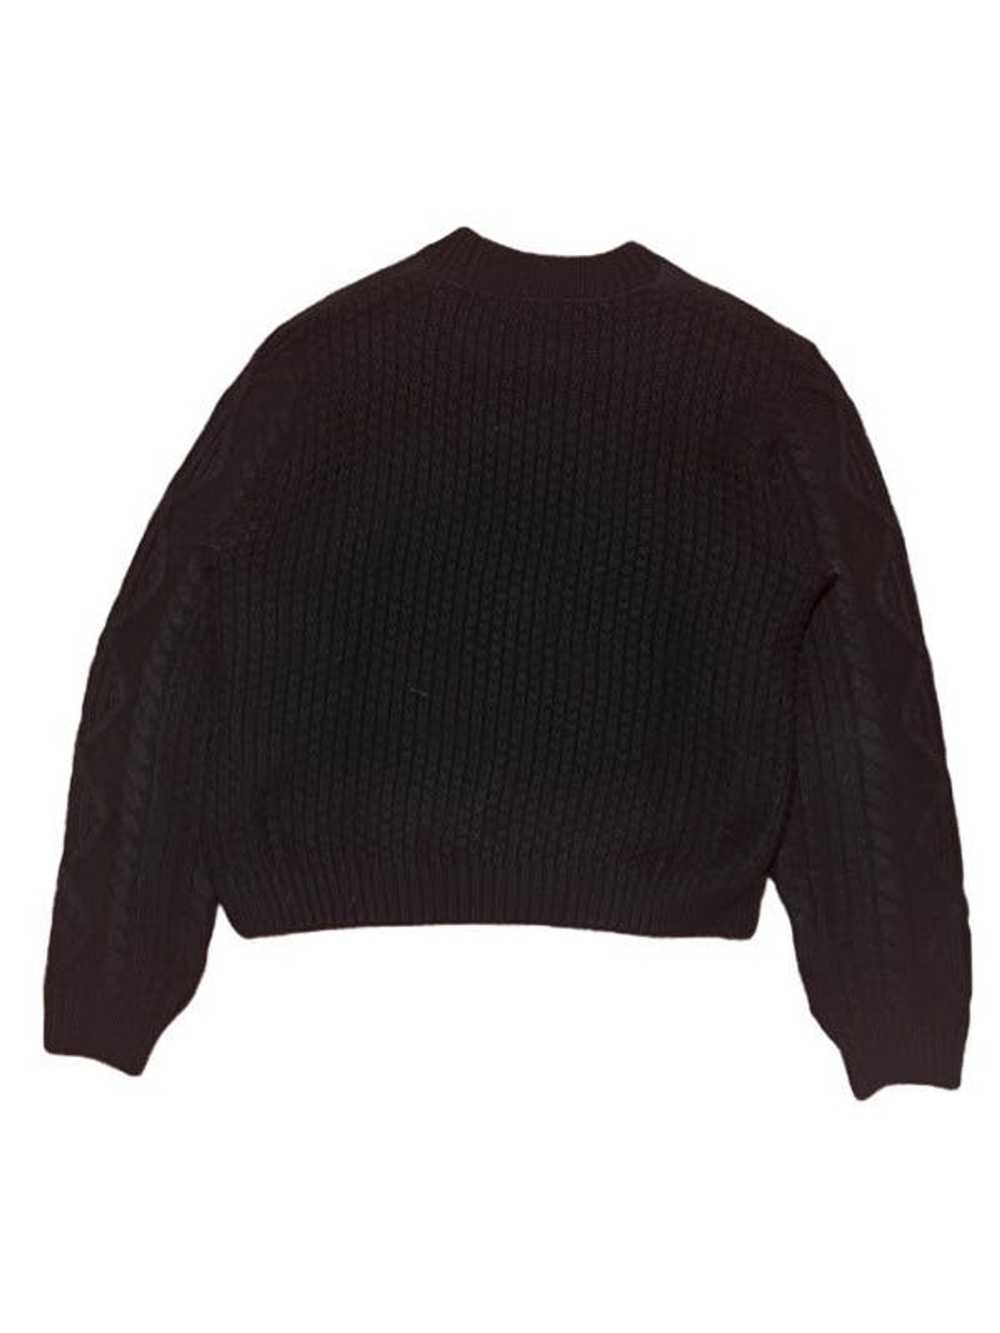 Hysteric Glamour No Future hybrid knit sweater - image 4